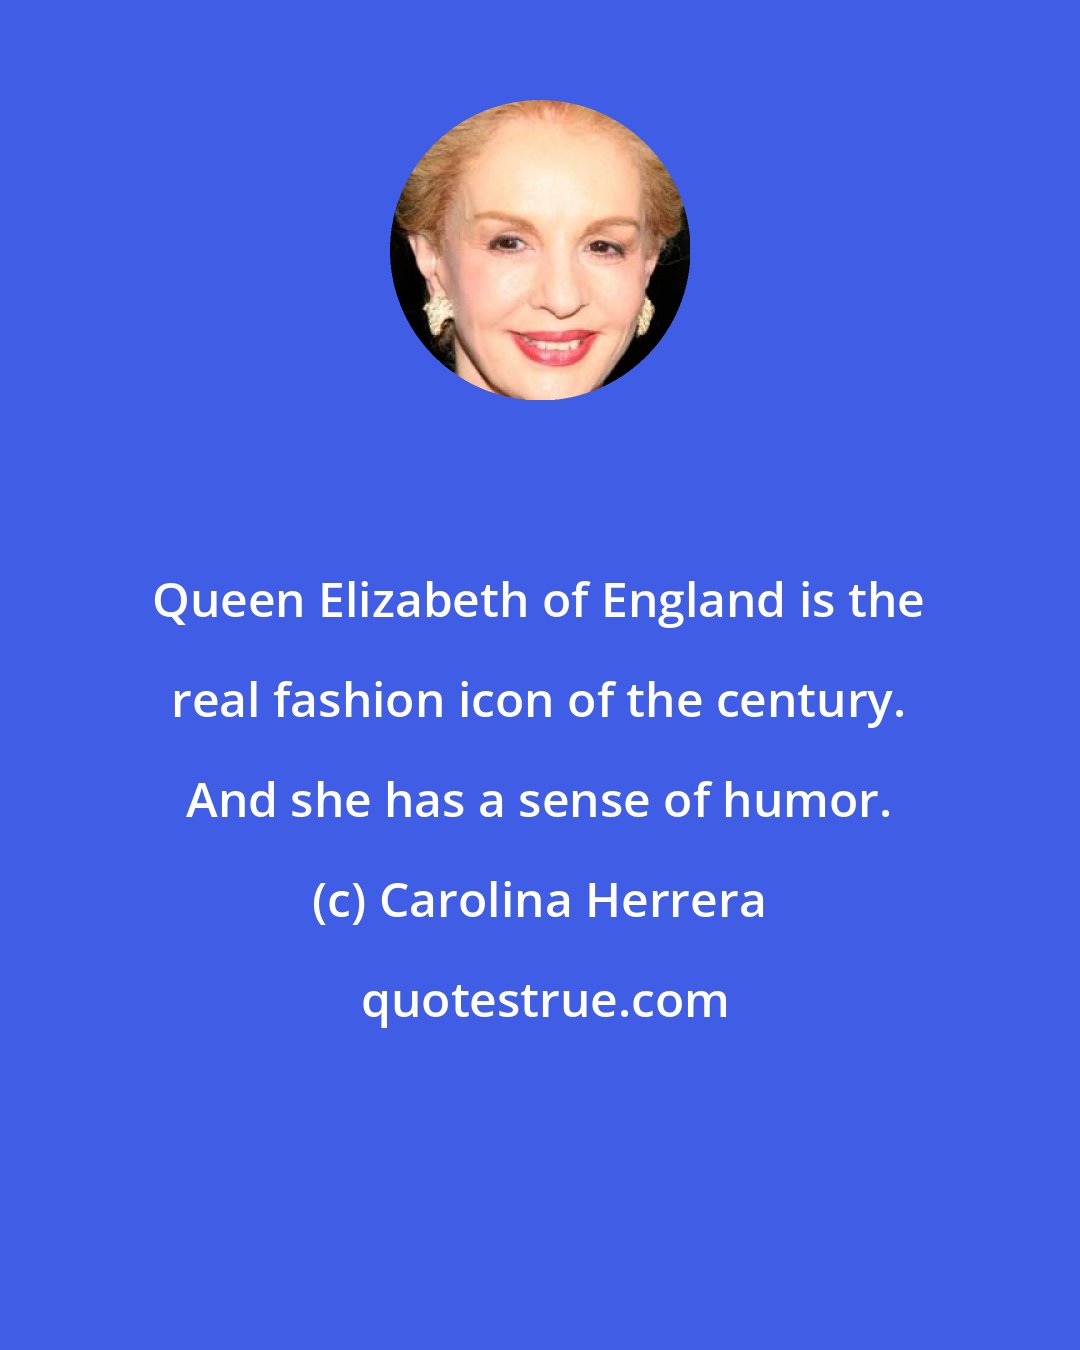 Carolina Herrera: Queen Elizabeth of England is the real fashion icon of the century. And she has a sense of humor.